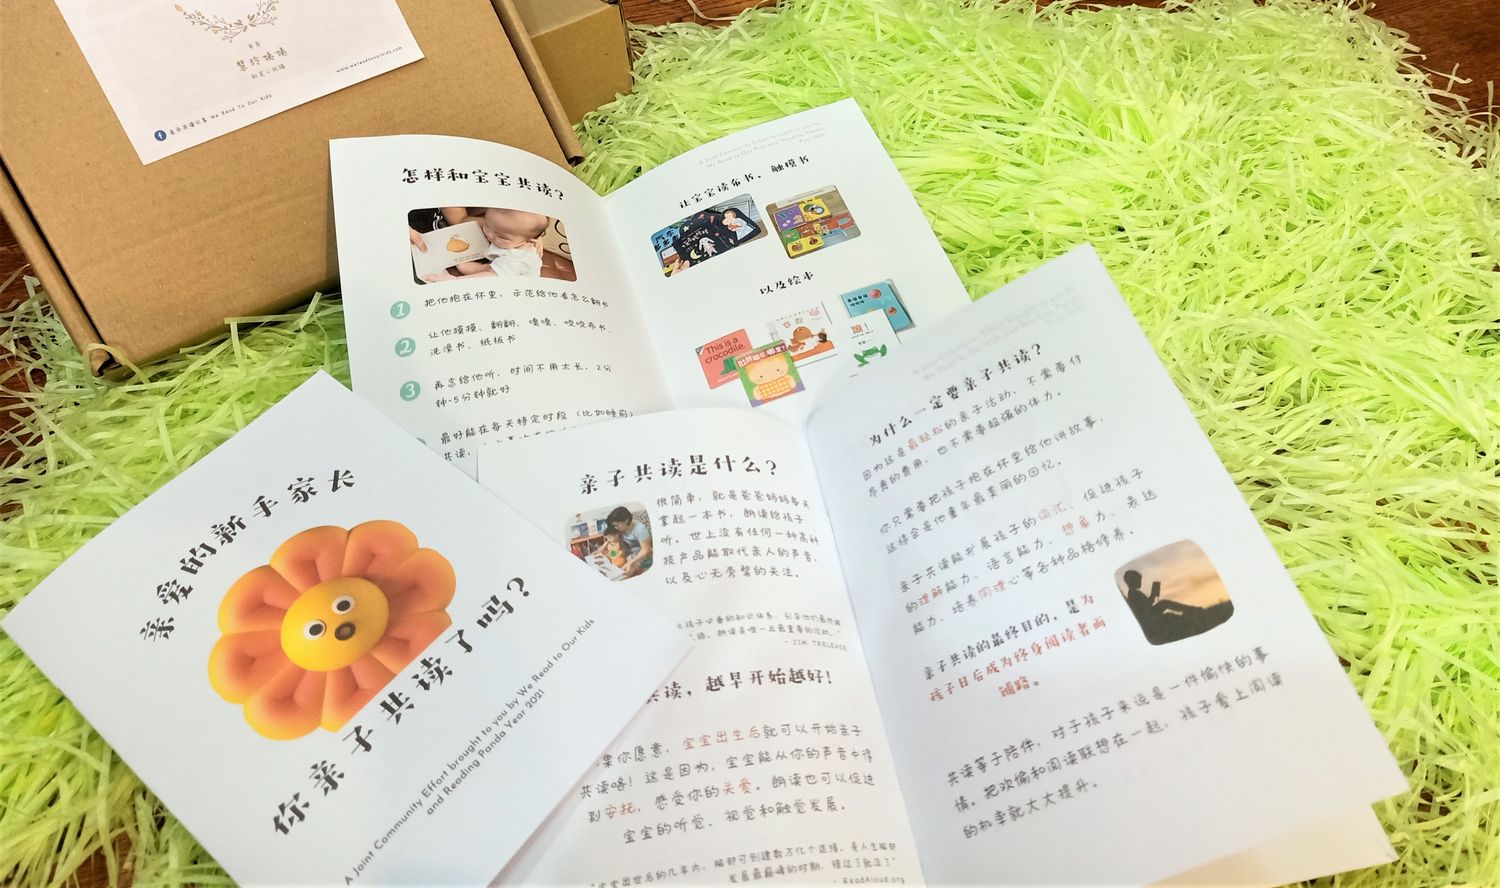 Read Aloud Starter Guide Available in English and Chinese Version